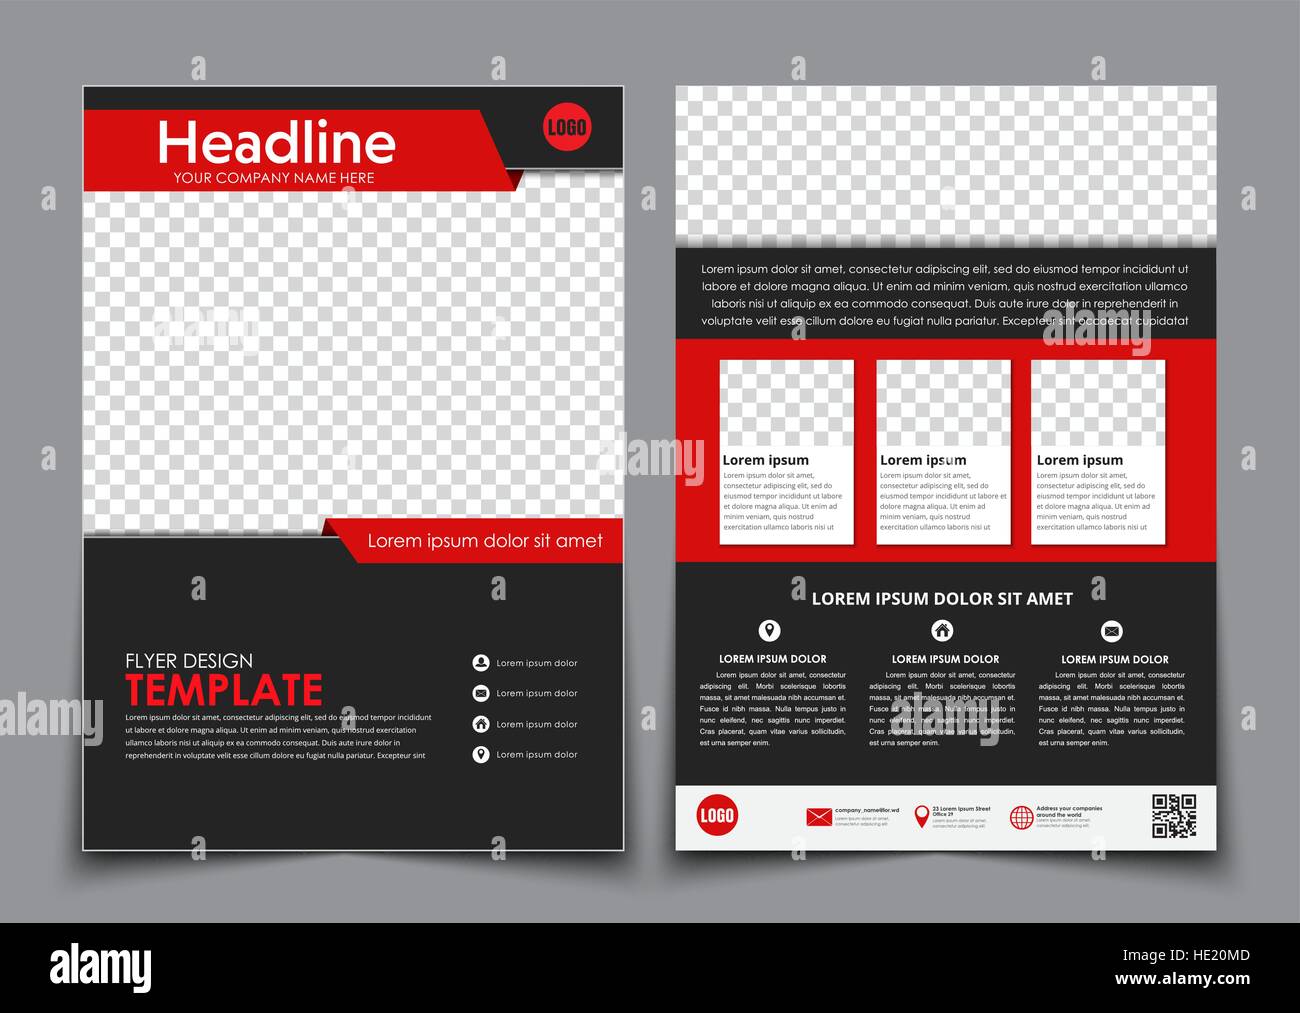 Template flyer black with red elements for printing. Template 23 For 2 Page Flyer Template